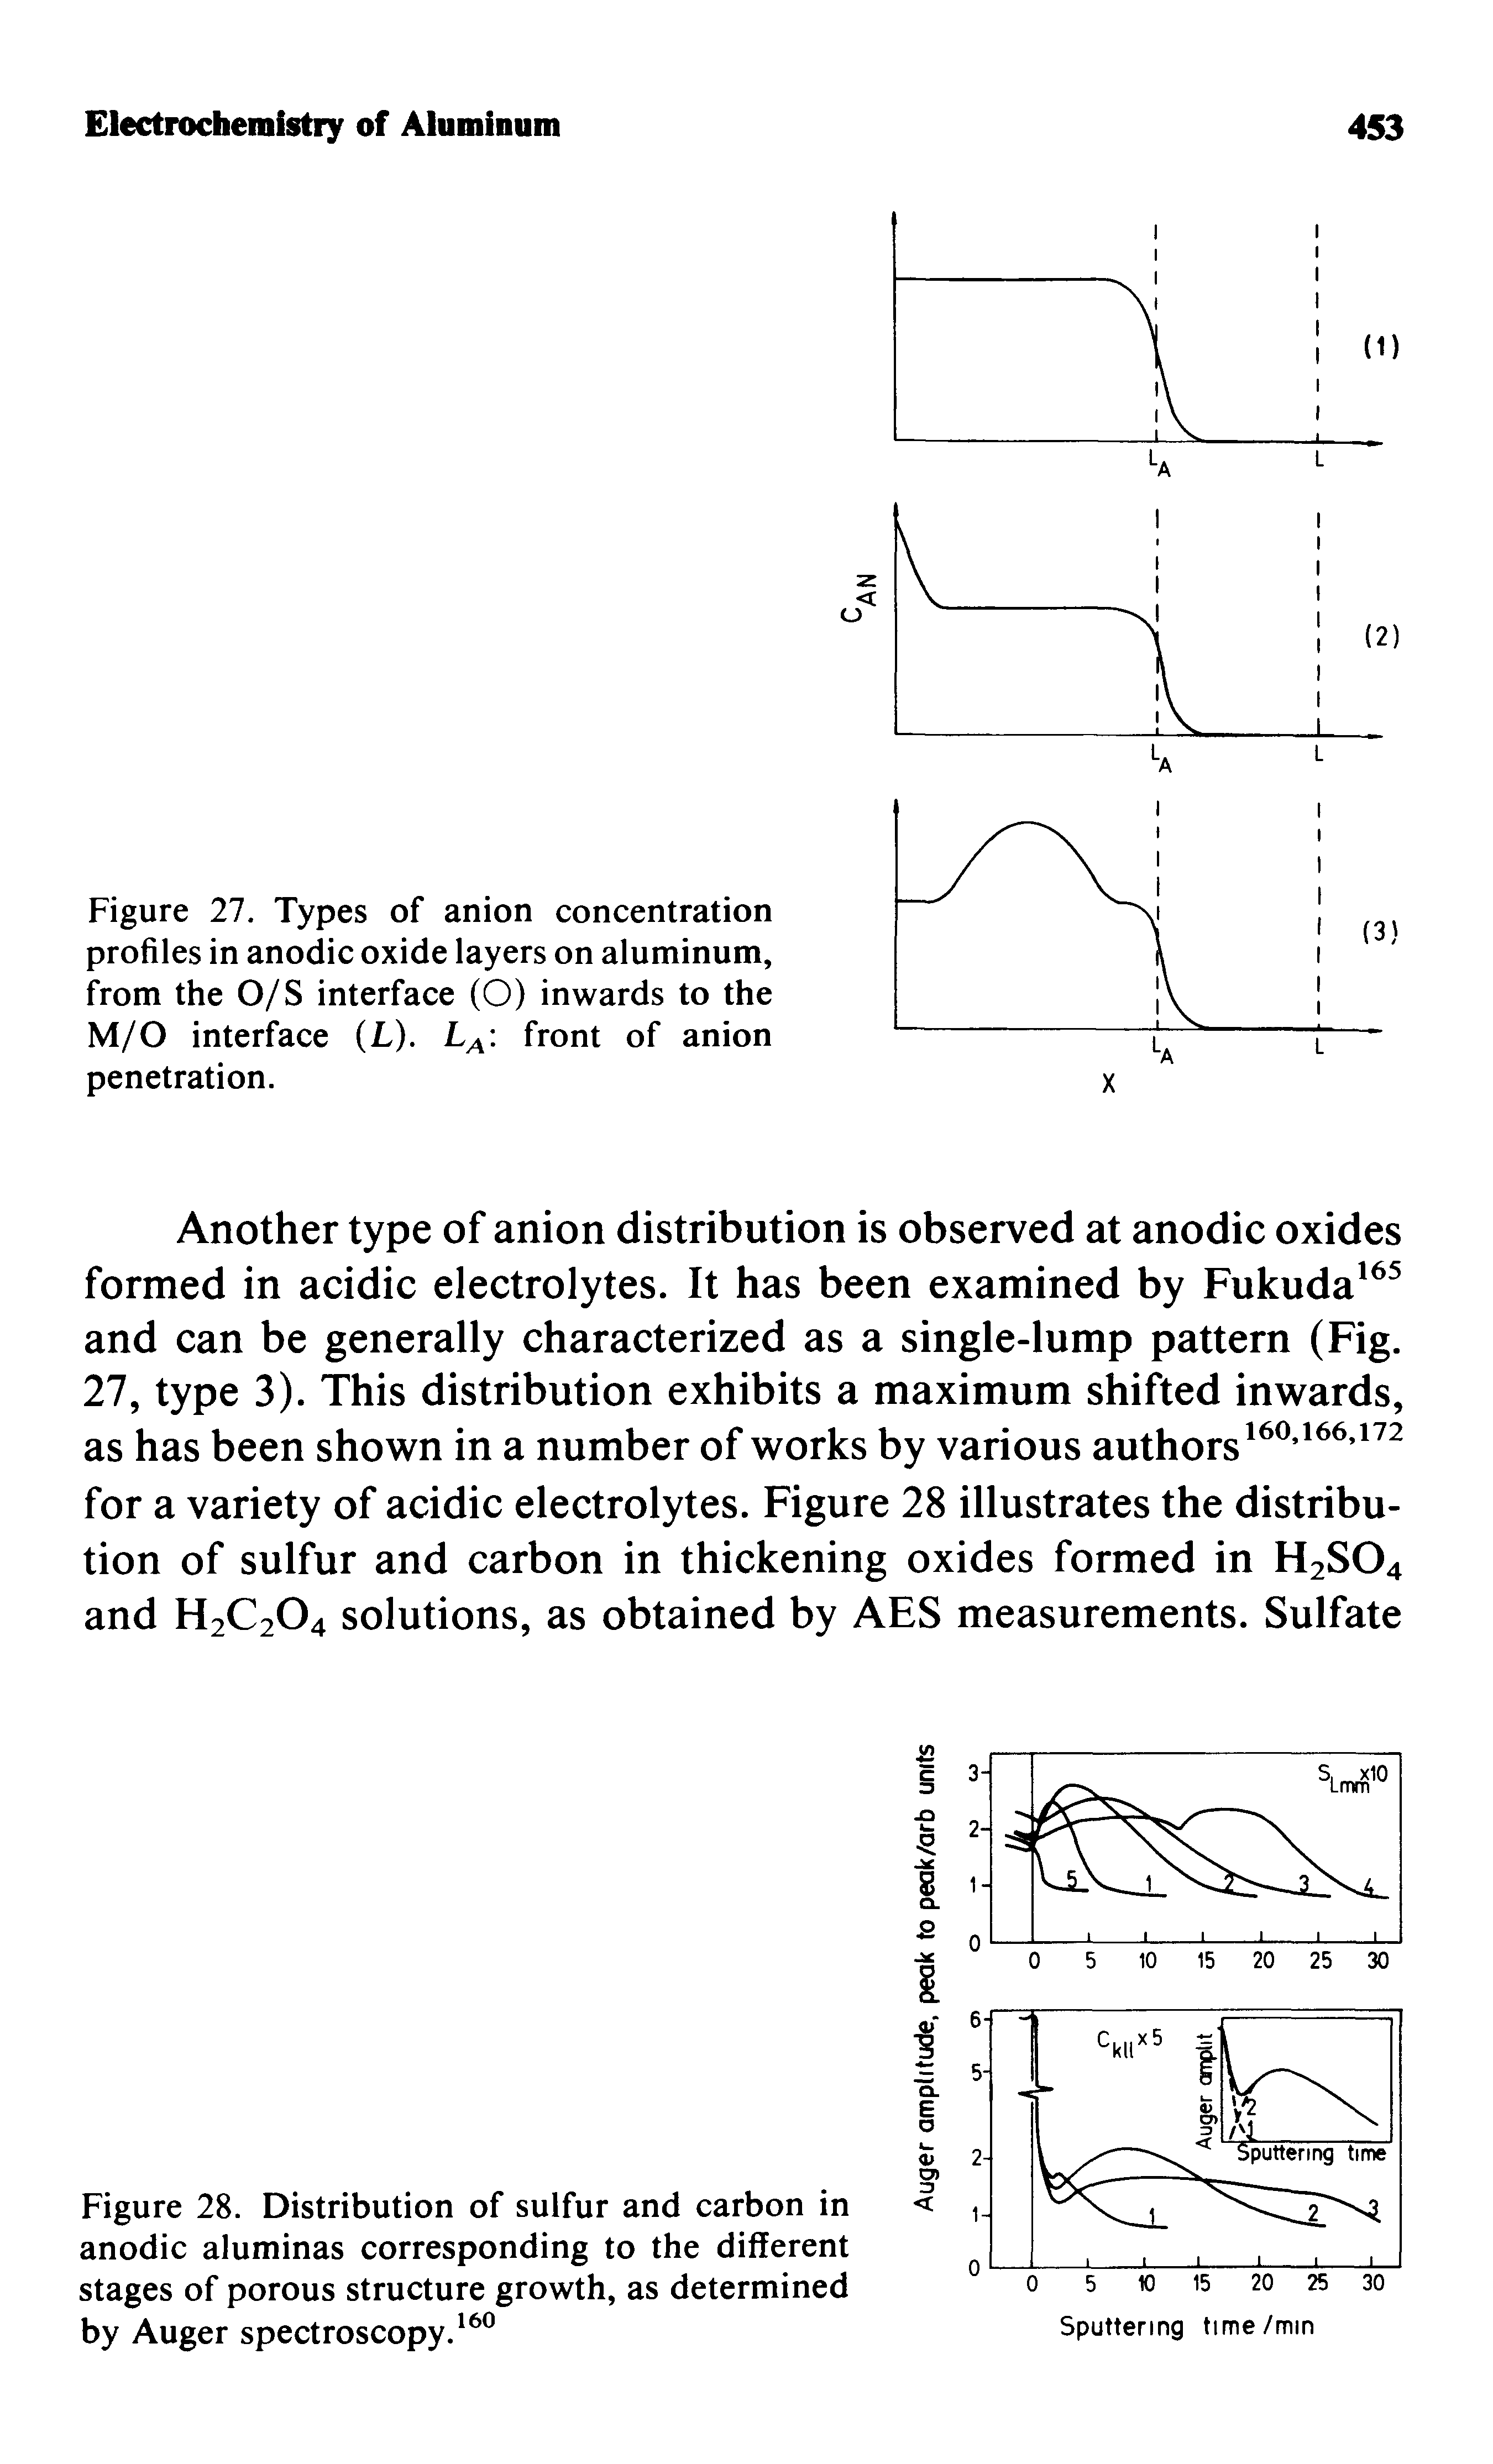 Figure 28. Distribution of sulfur and carbon in anodic aluminas corresponding to the different stages of porous structure growth, as determined by Auger spectroscopy.160...